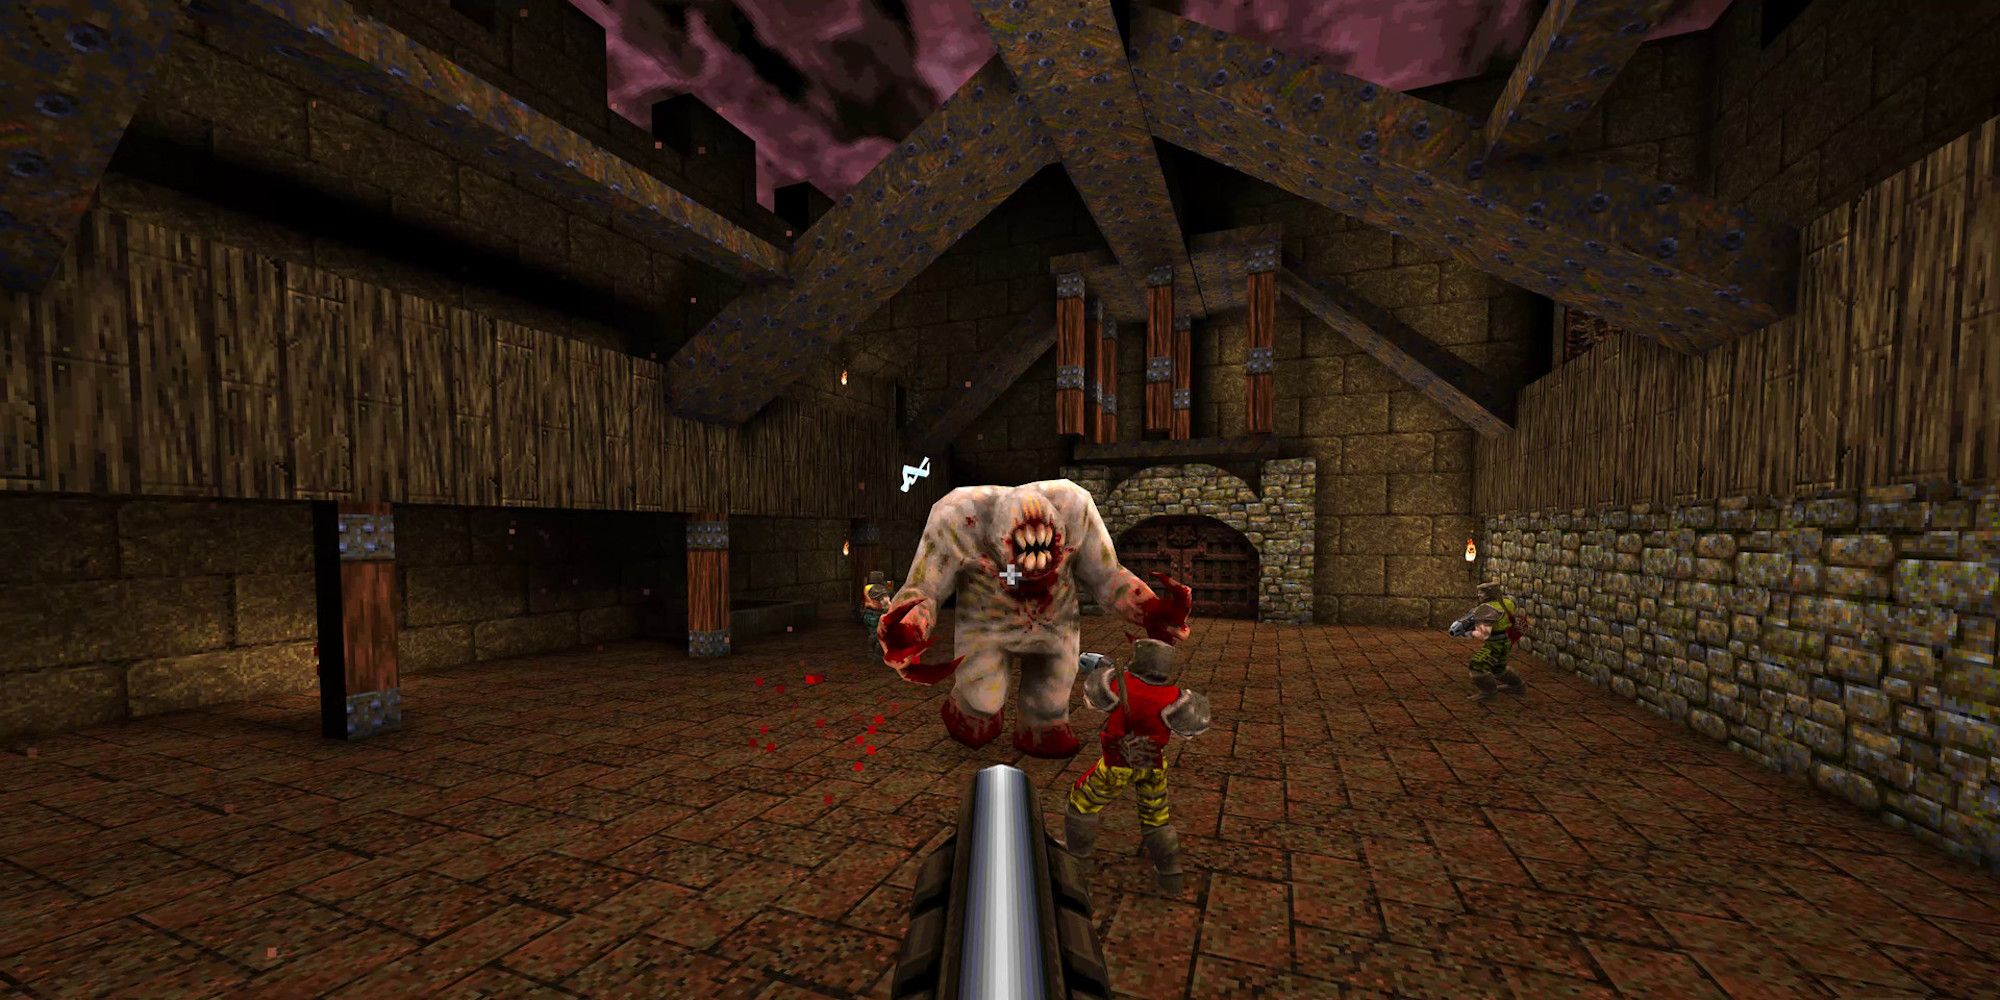 The player shoots a monster in Quake Remastered 